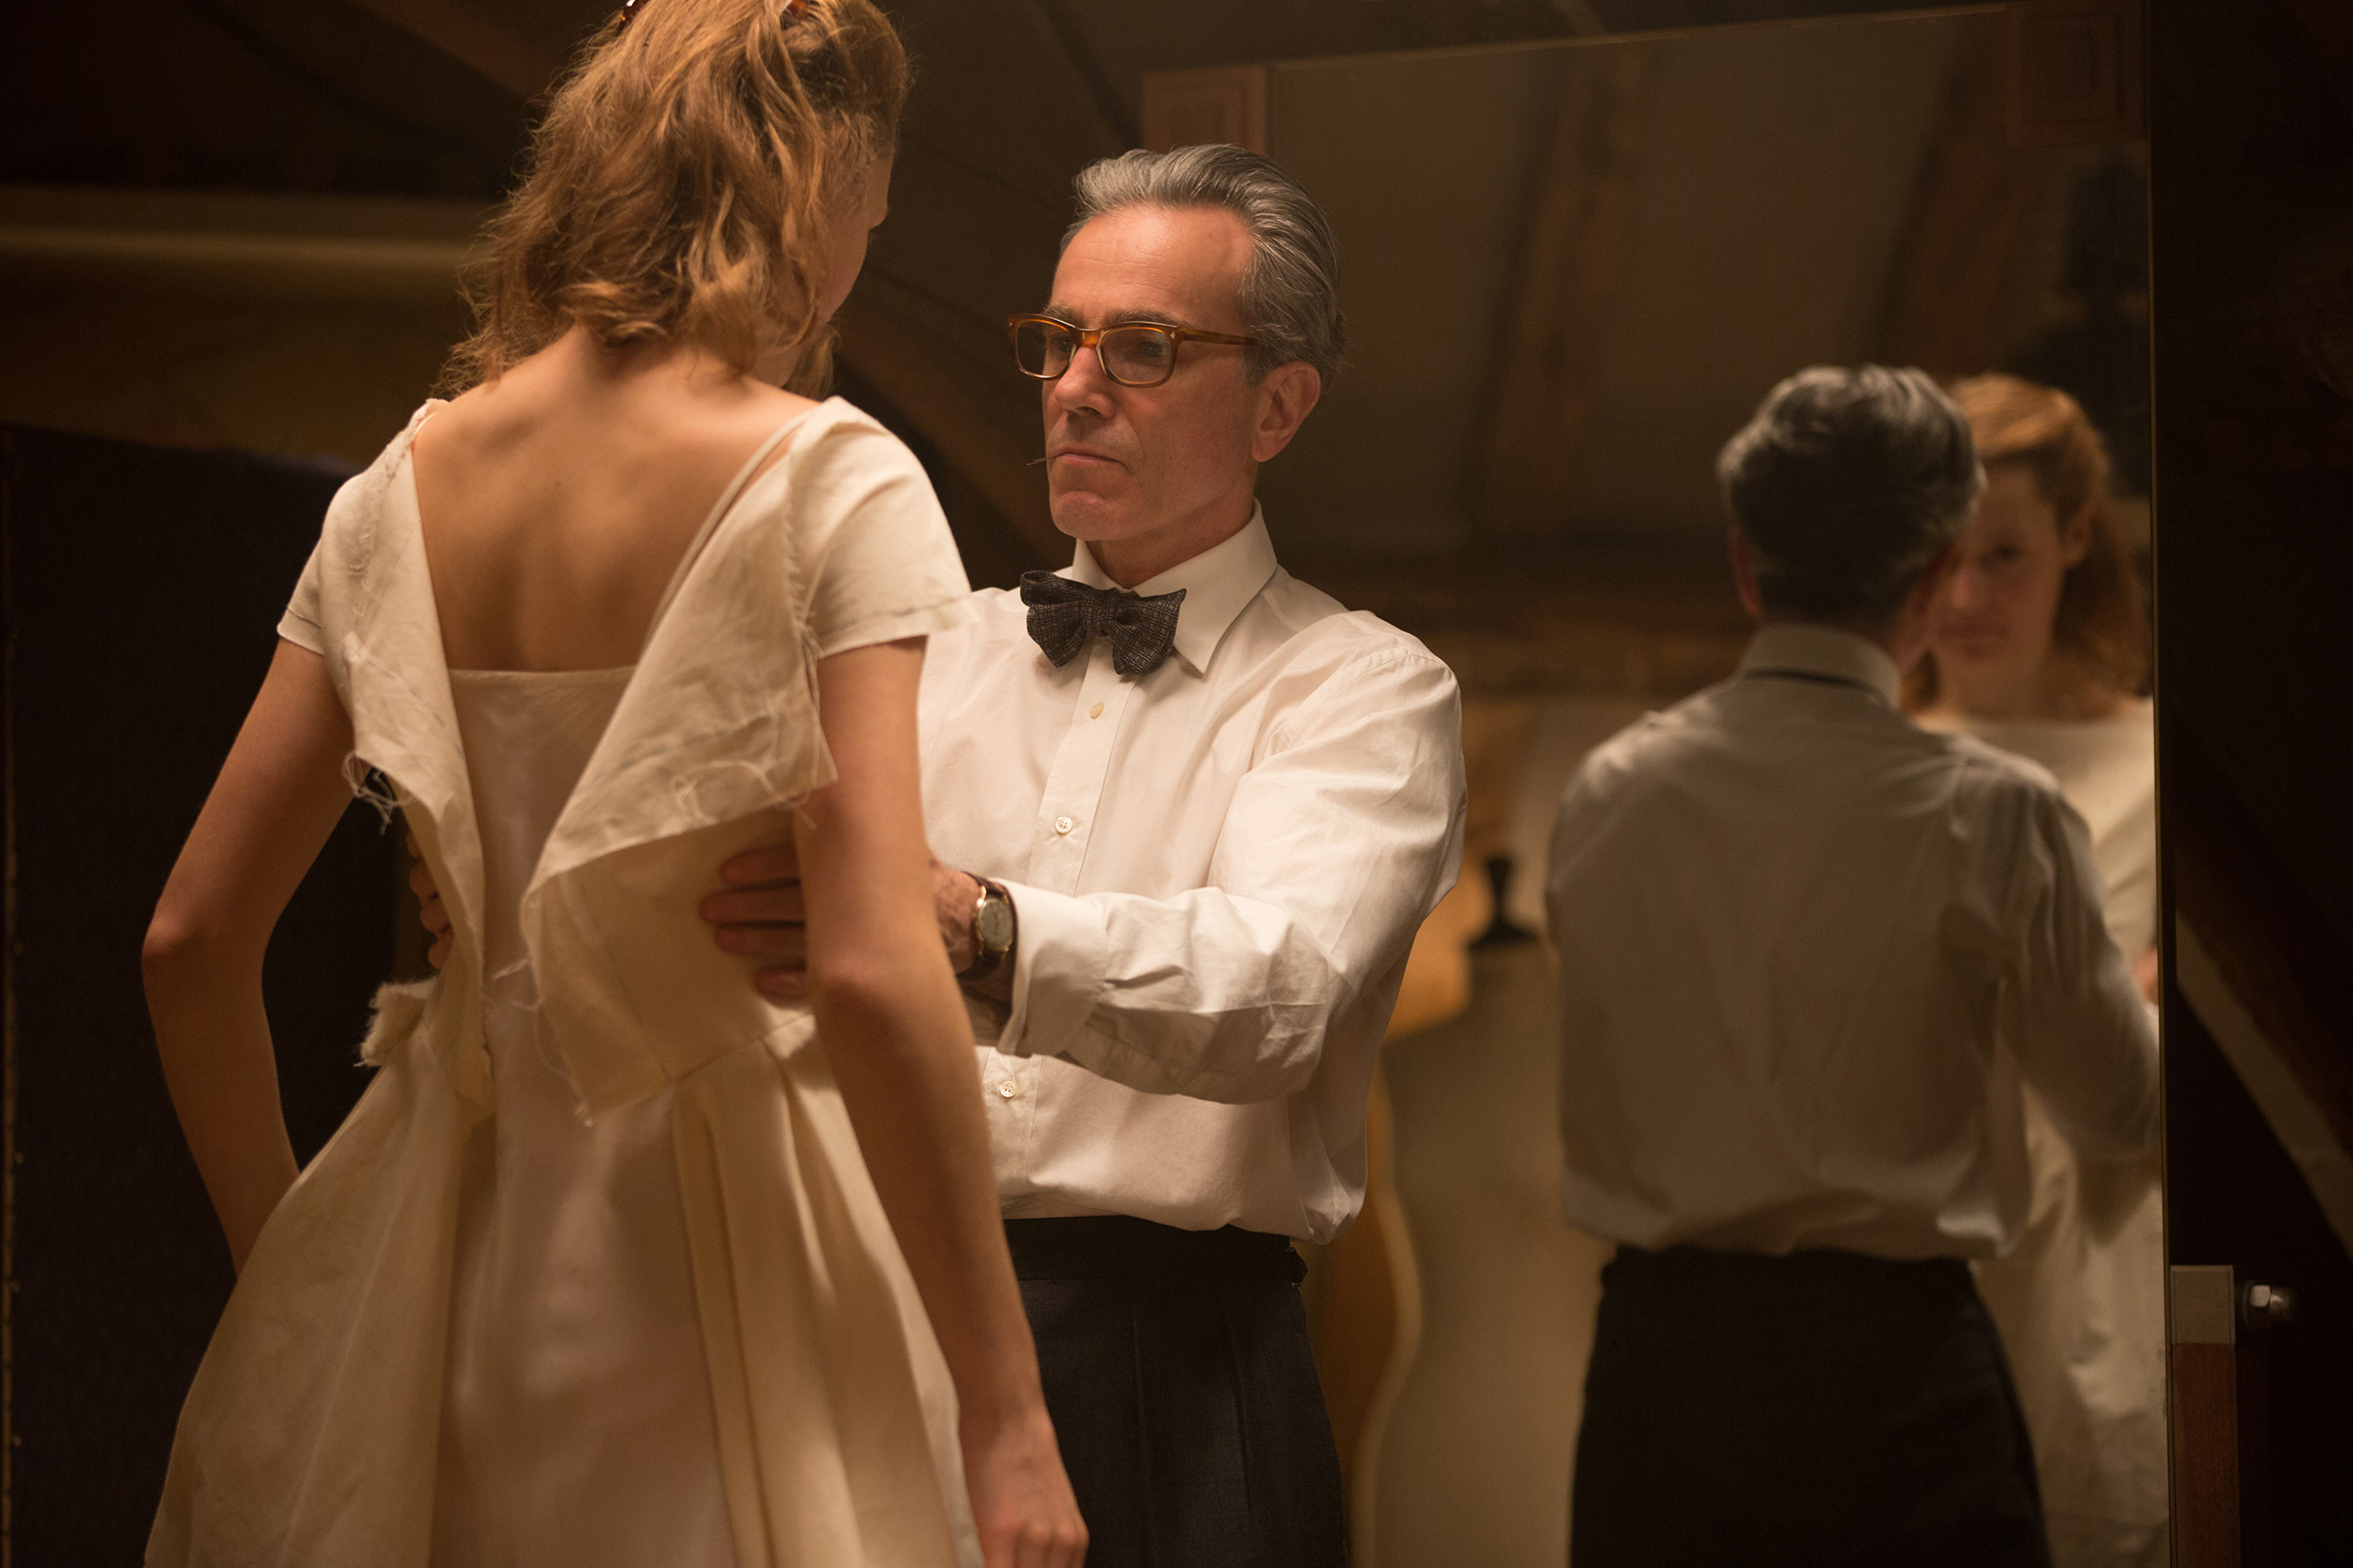 Vicky Krieps stars as “Alma” and Daniel Day-Lewis stars as “Reynolds Woodcock” in Paul Thomas Anderson’s Phantom Thread. (Focus Features)